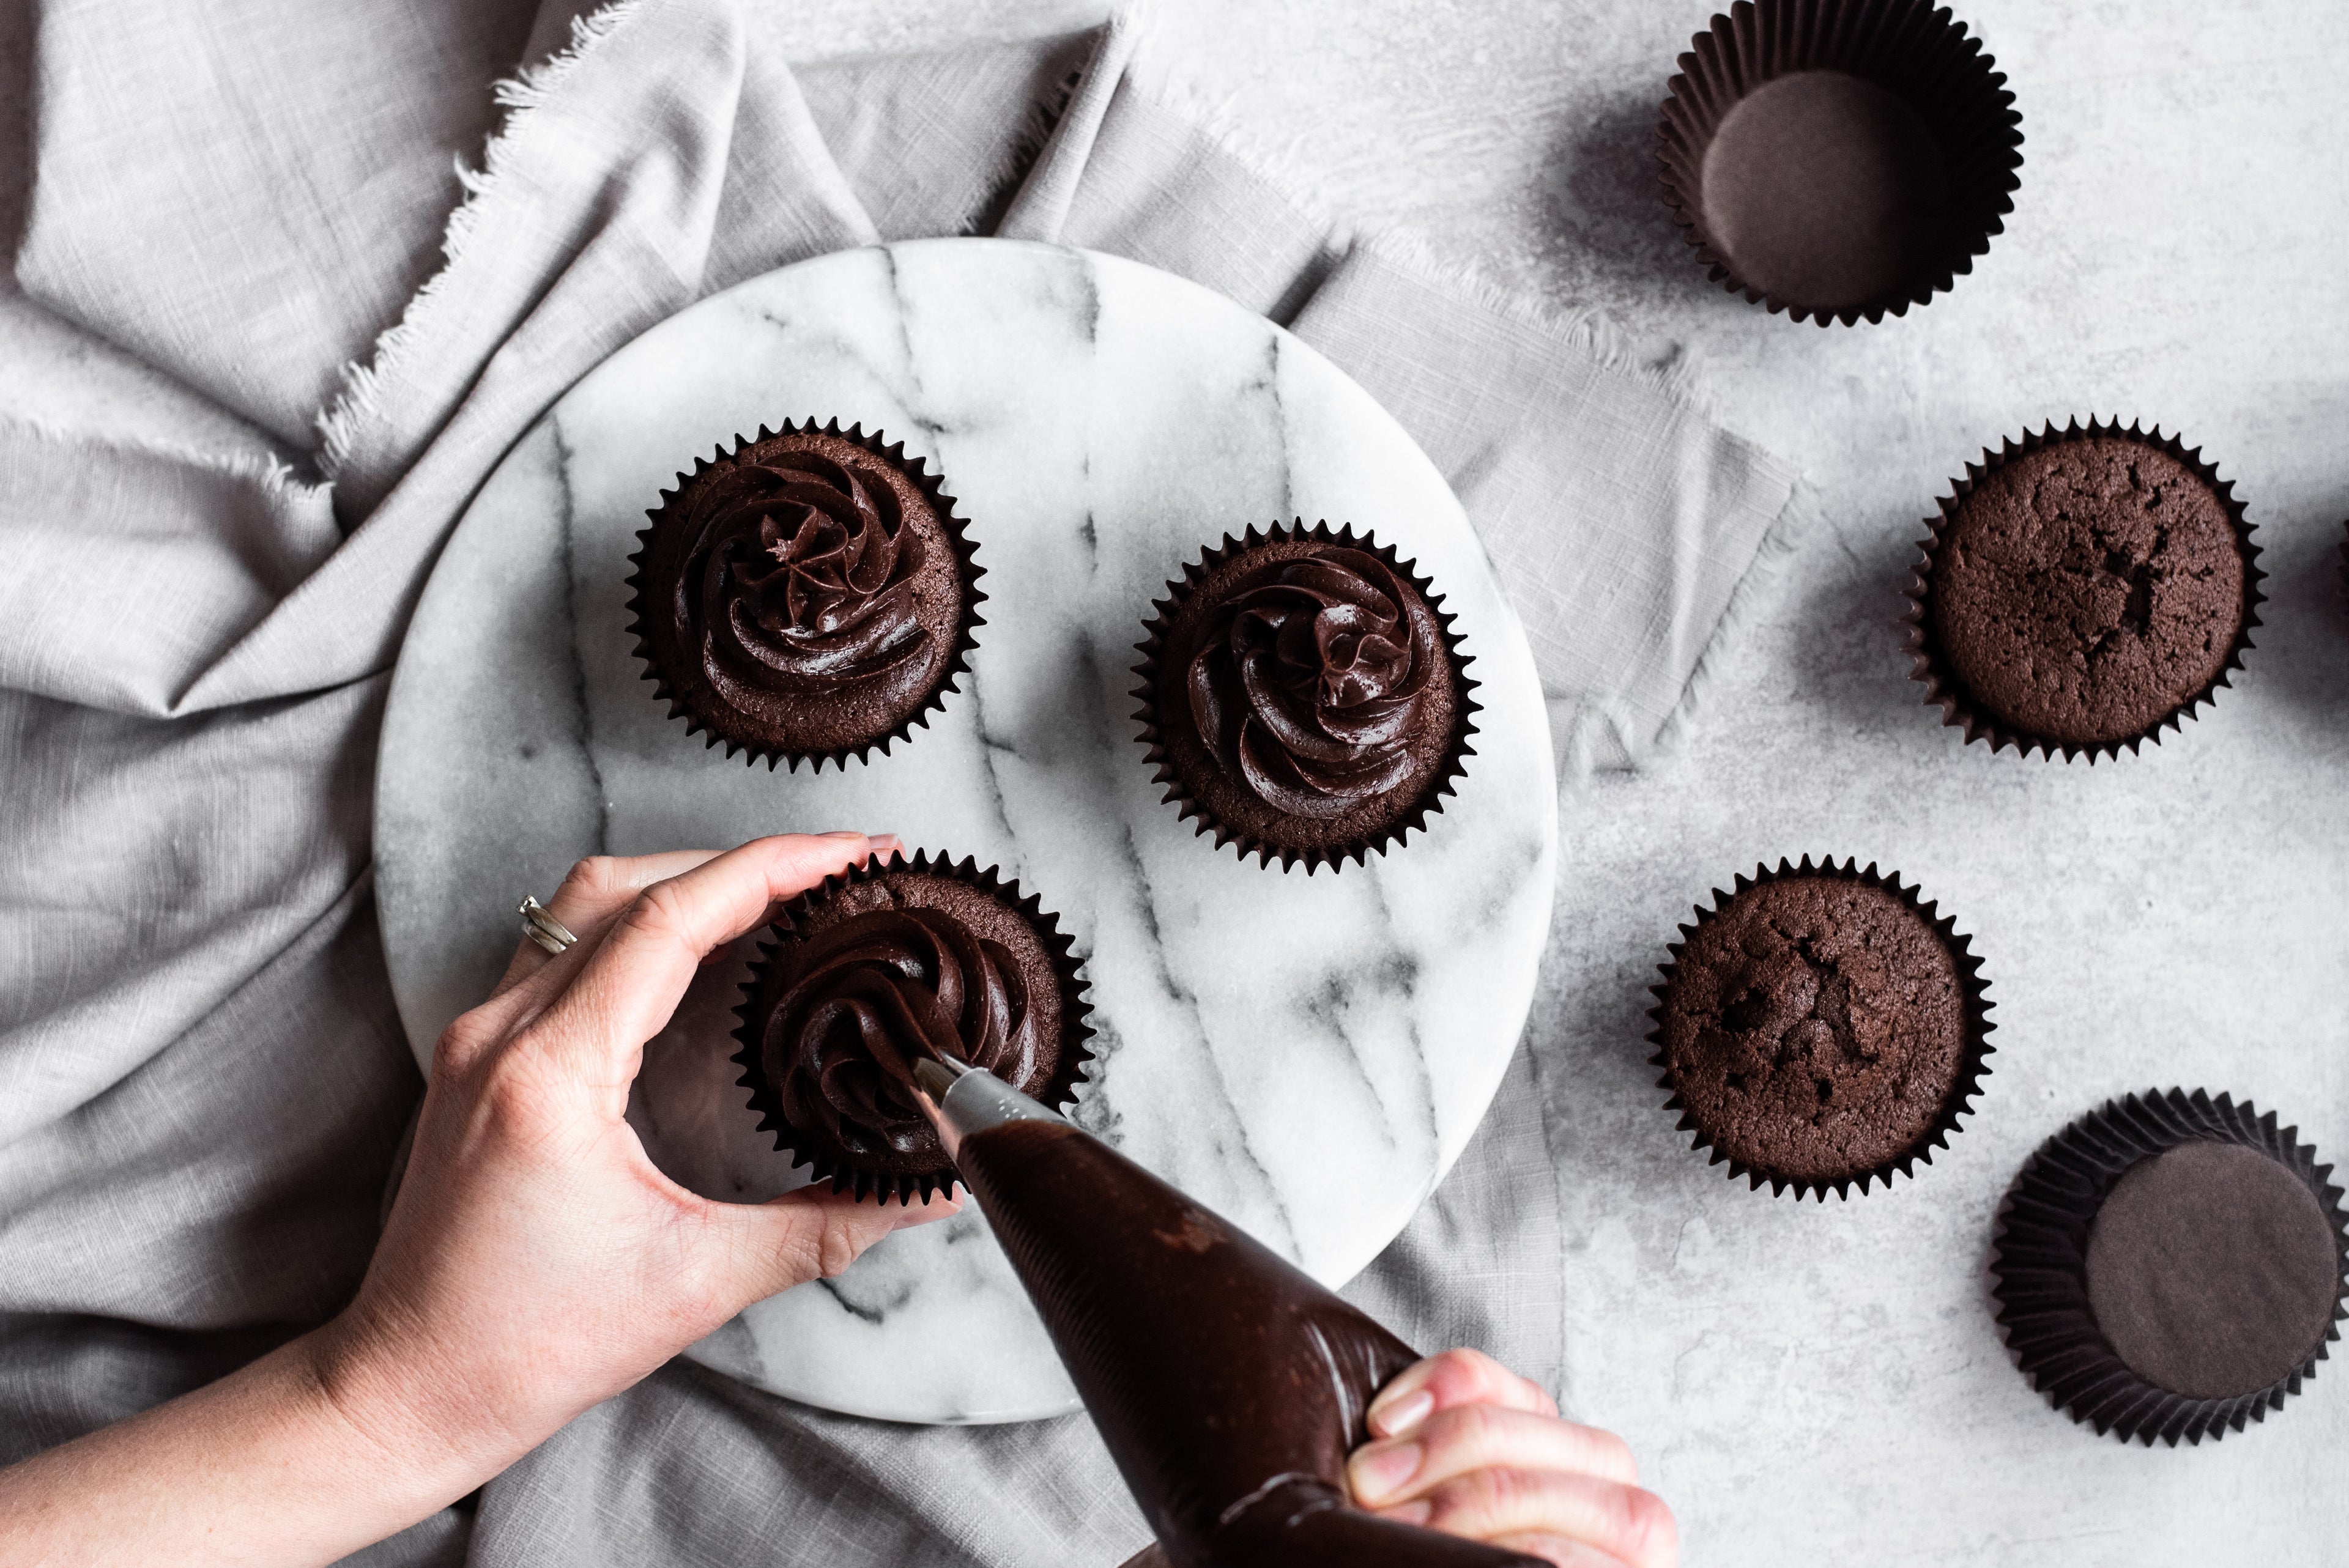 Chocolate cupcakes being frosted with chocolate buttercream